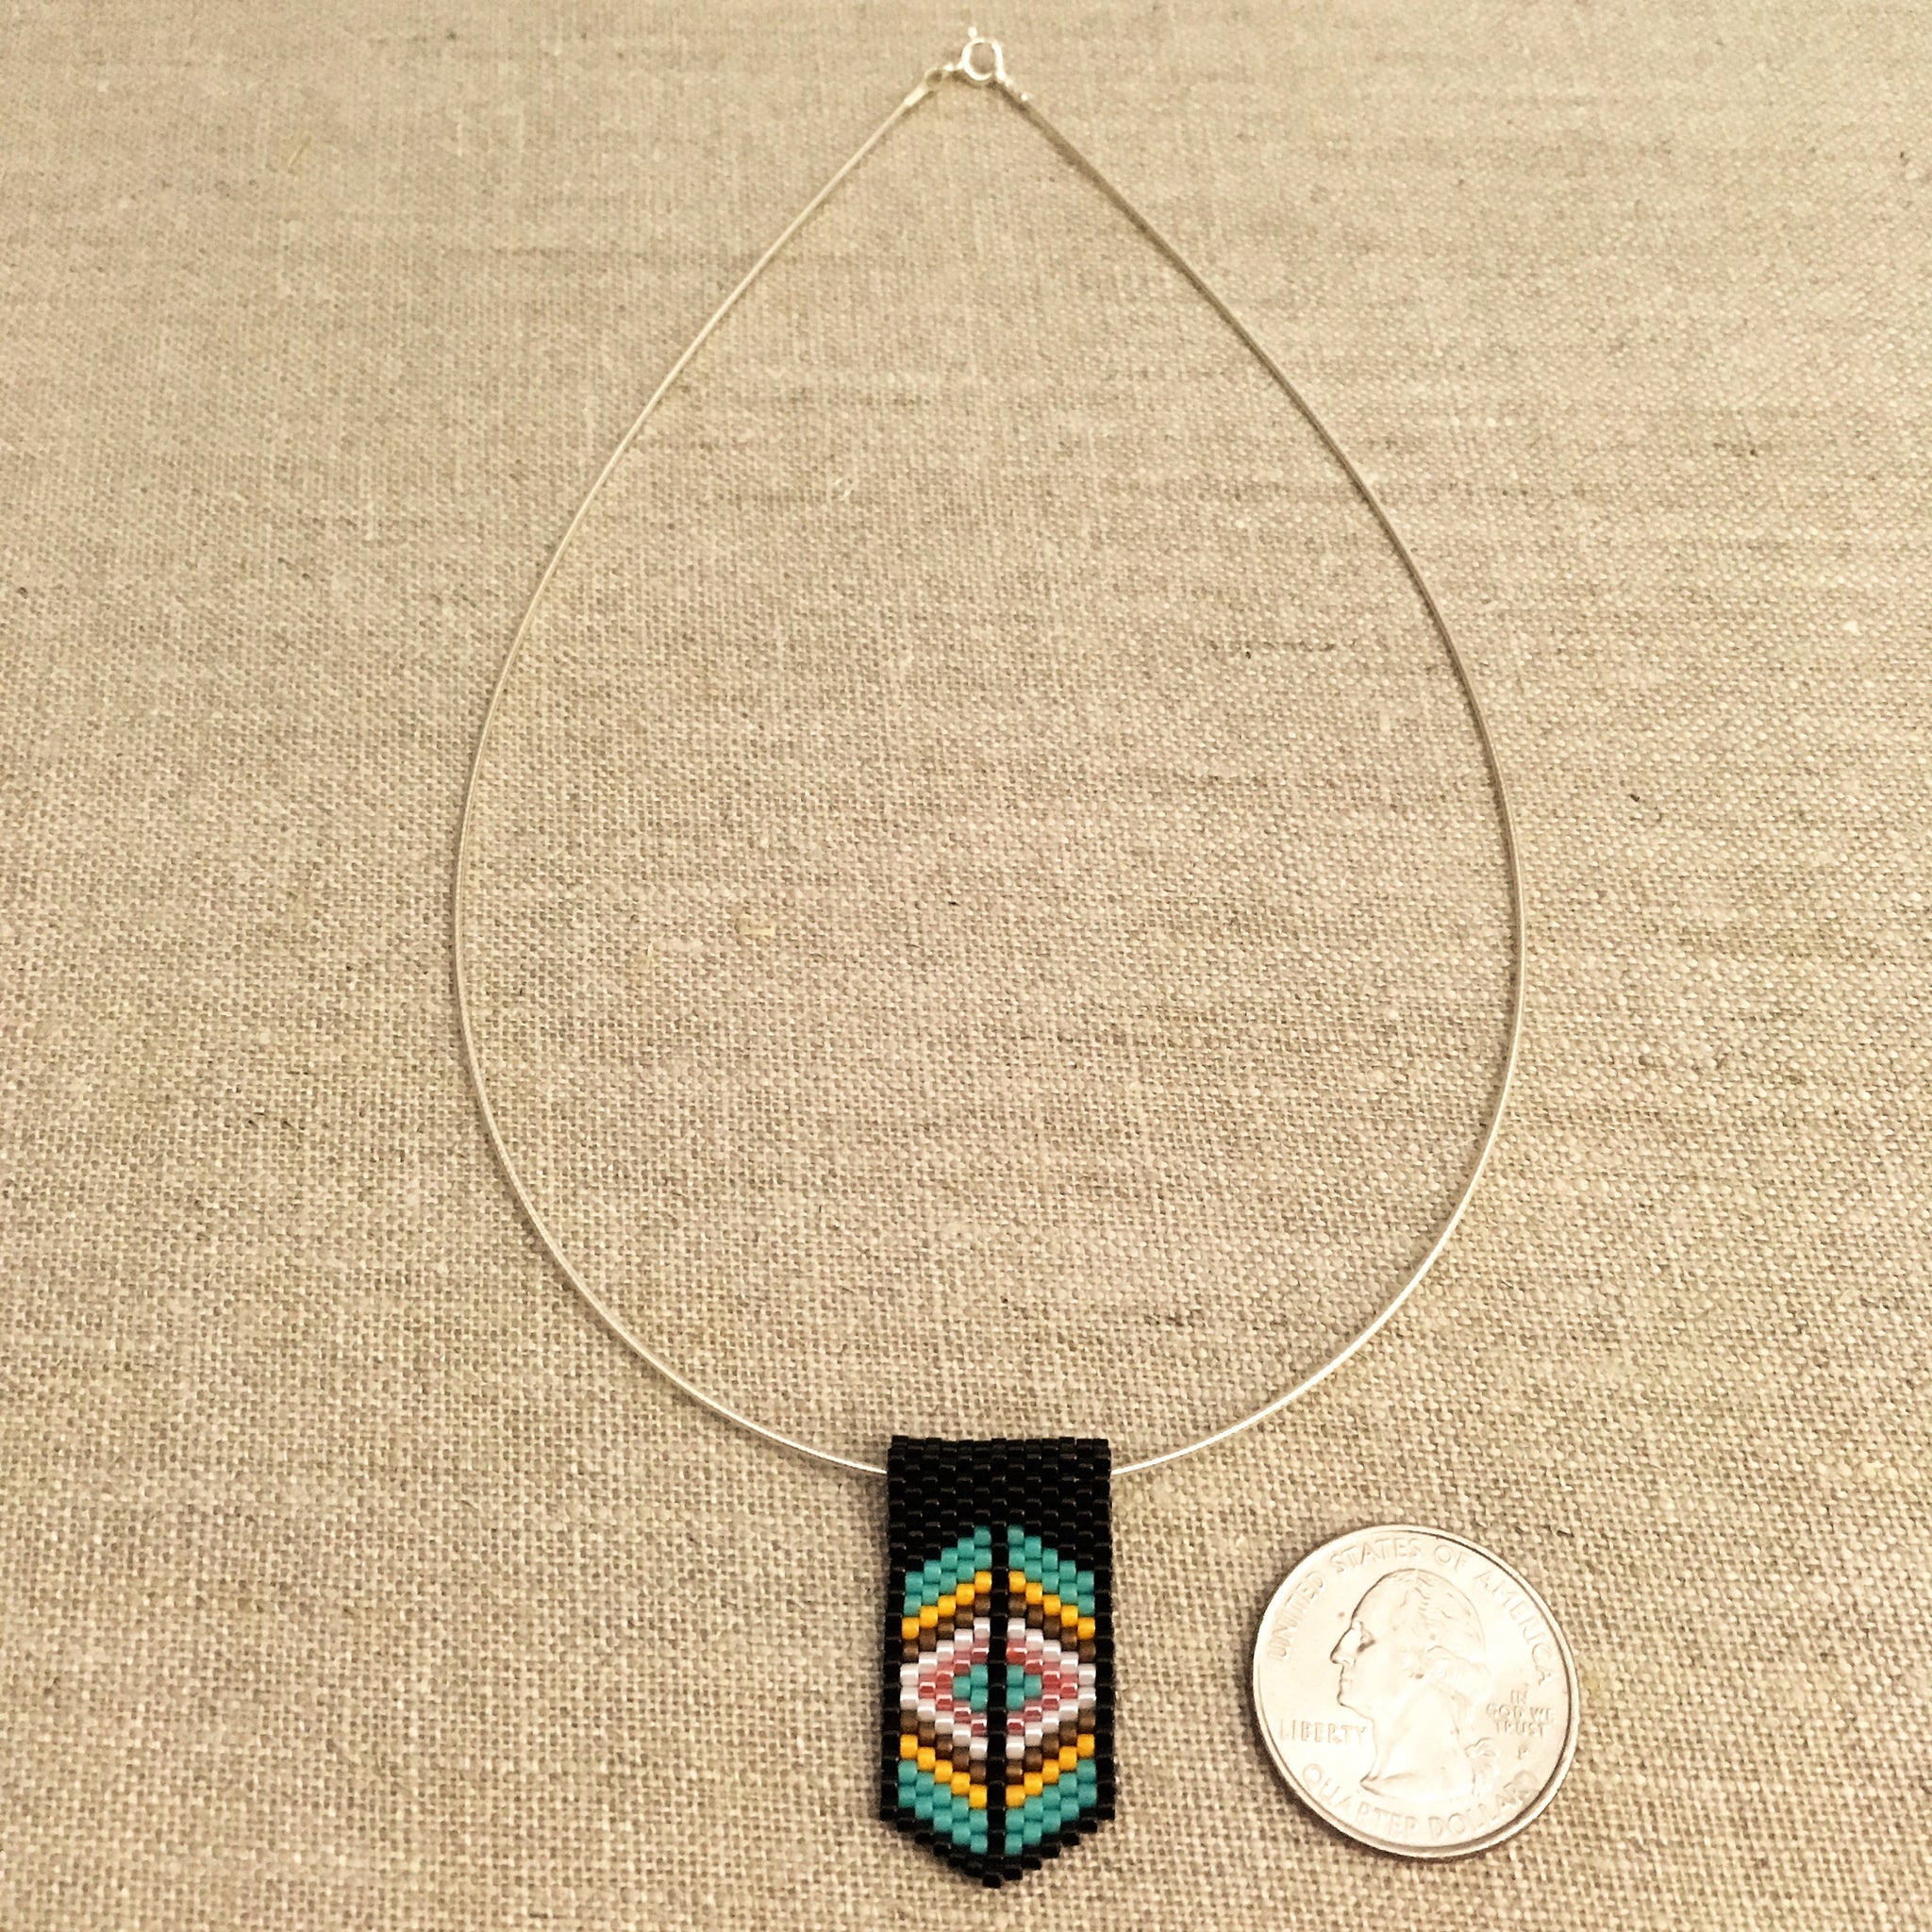 Mini Pendant Necklace in Black, Turquoise, Pumpkin and White